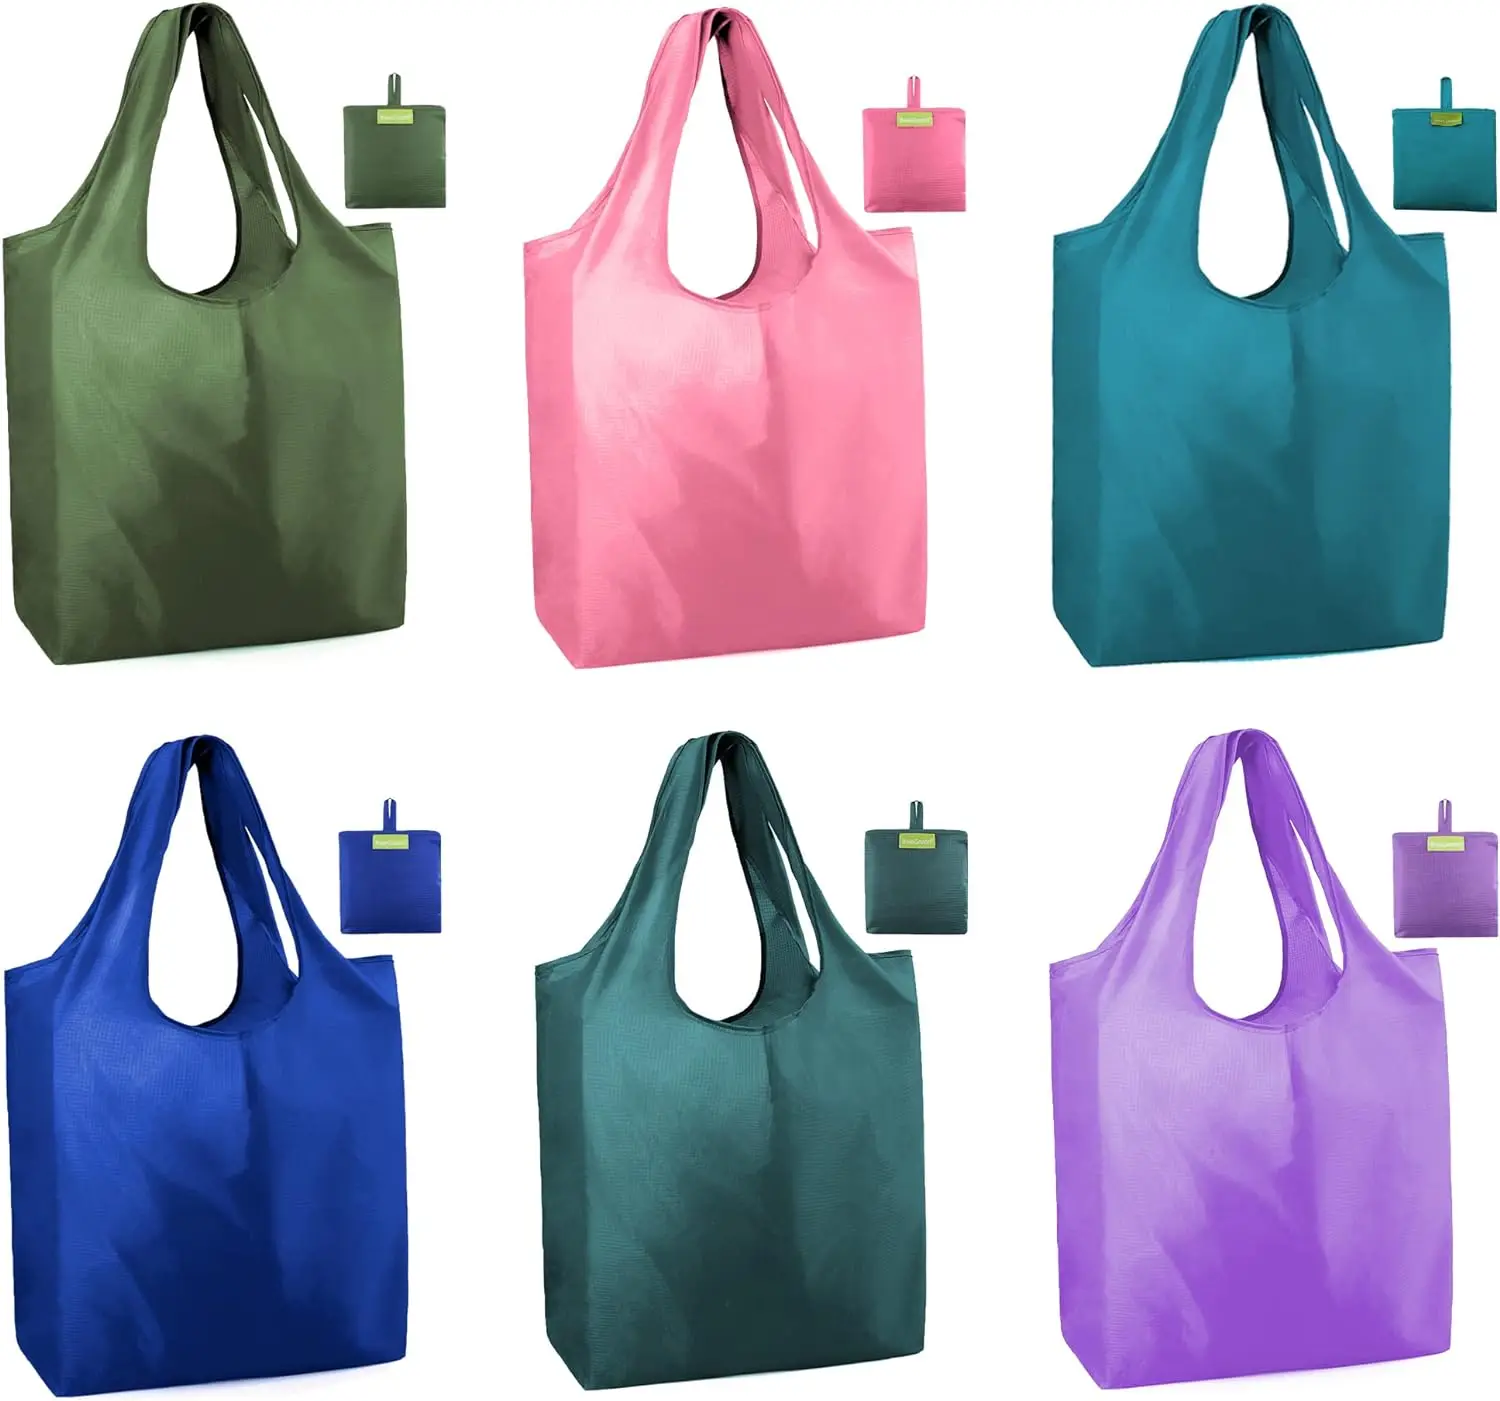 

Shopping Bags Reusable Grocery Tote Bags 6 Pack XLarge 50LBS Ripstop Geometric Fashion Recycling Bags with Pouch Bulk Machine